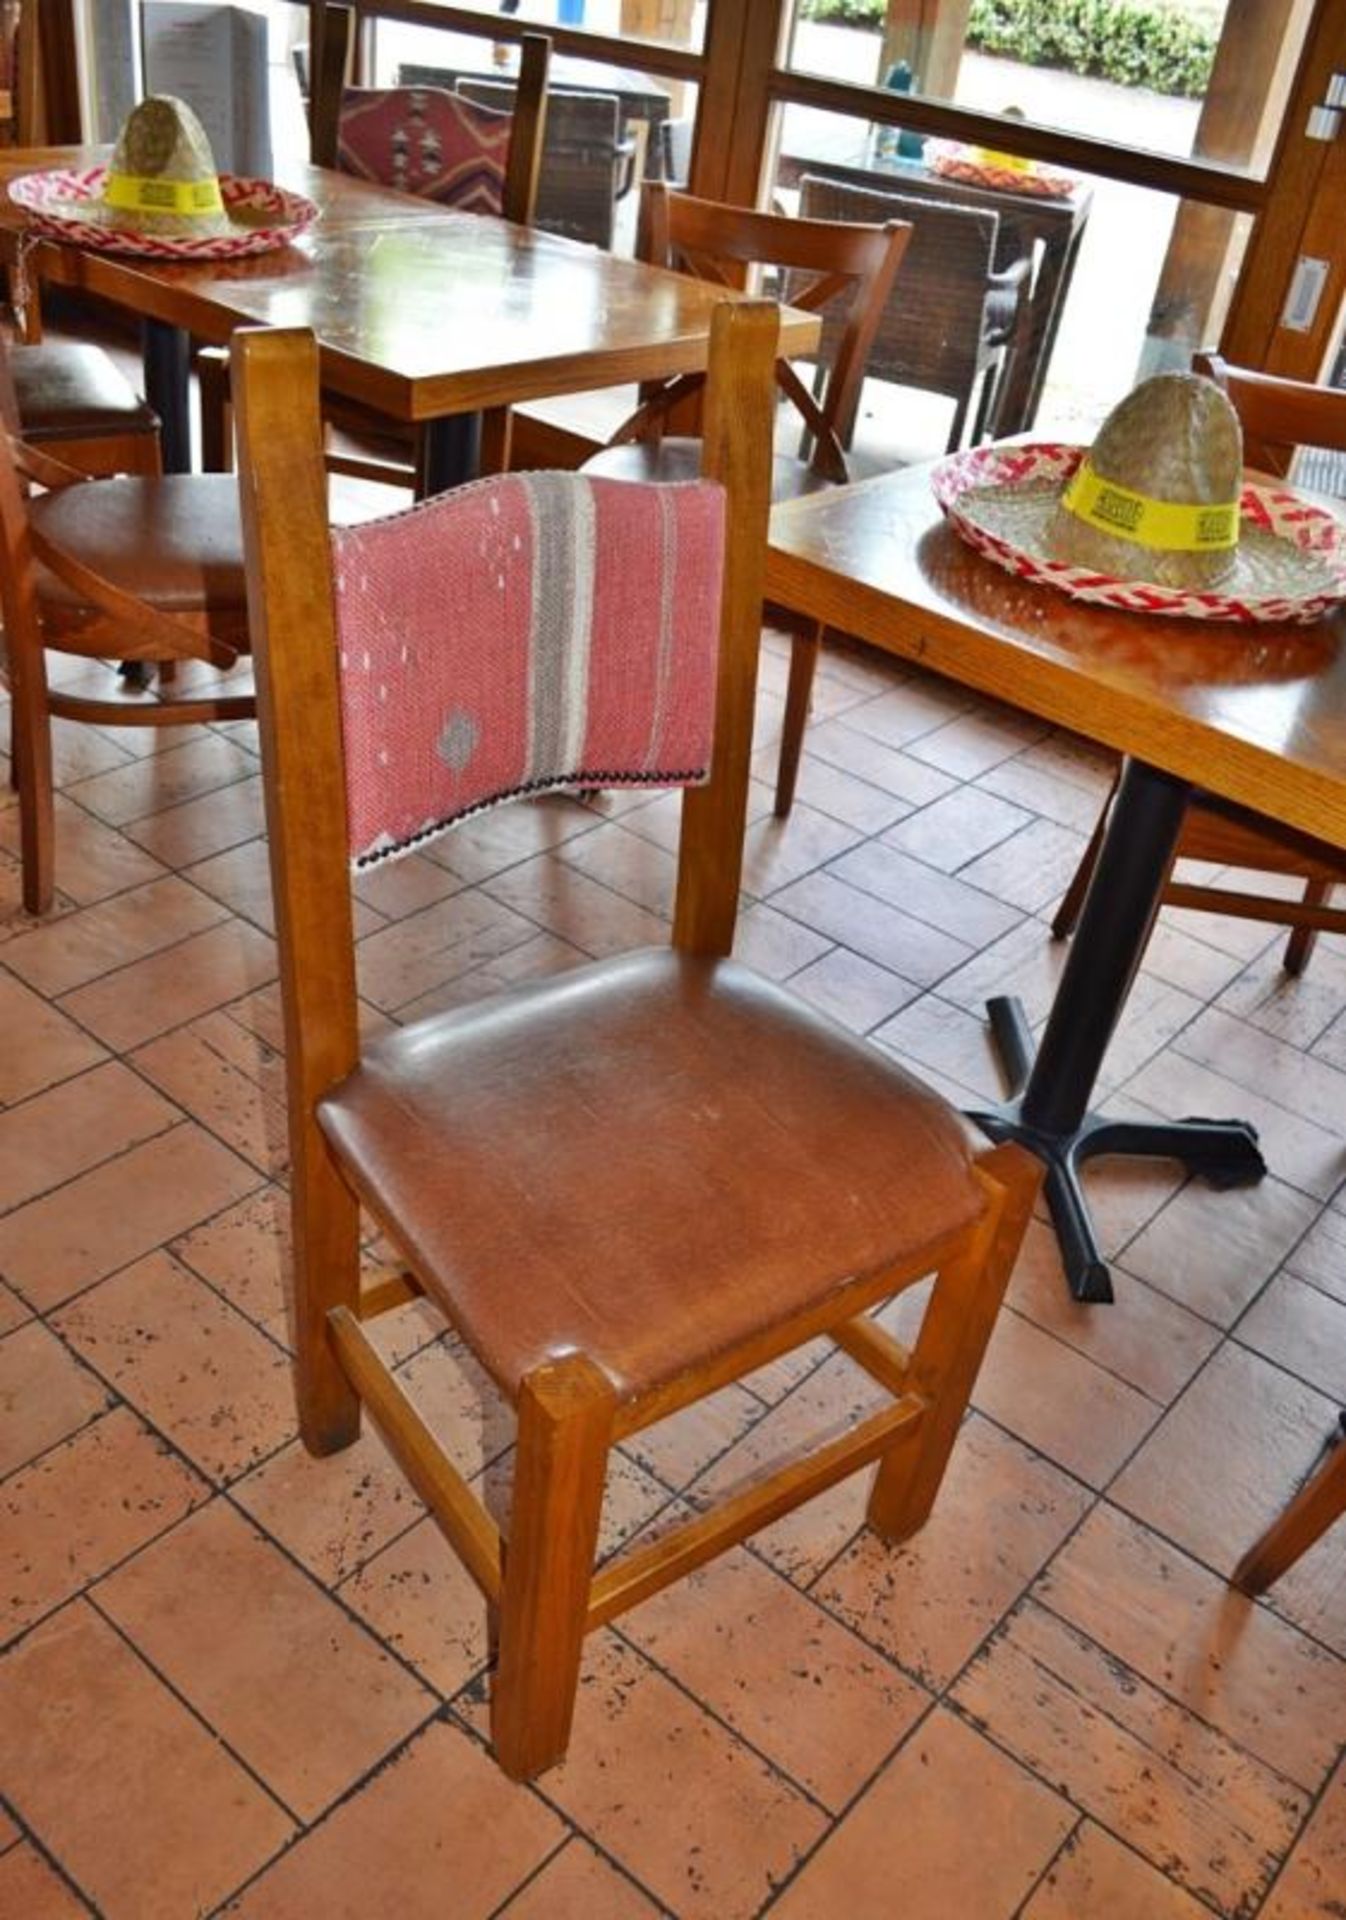 30 x Assorted Wooden Dining Chairs From Mexican Themed Restaurant -  Various Styles Included - CL363 - Image 8 of 10